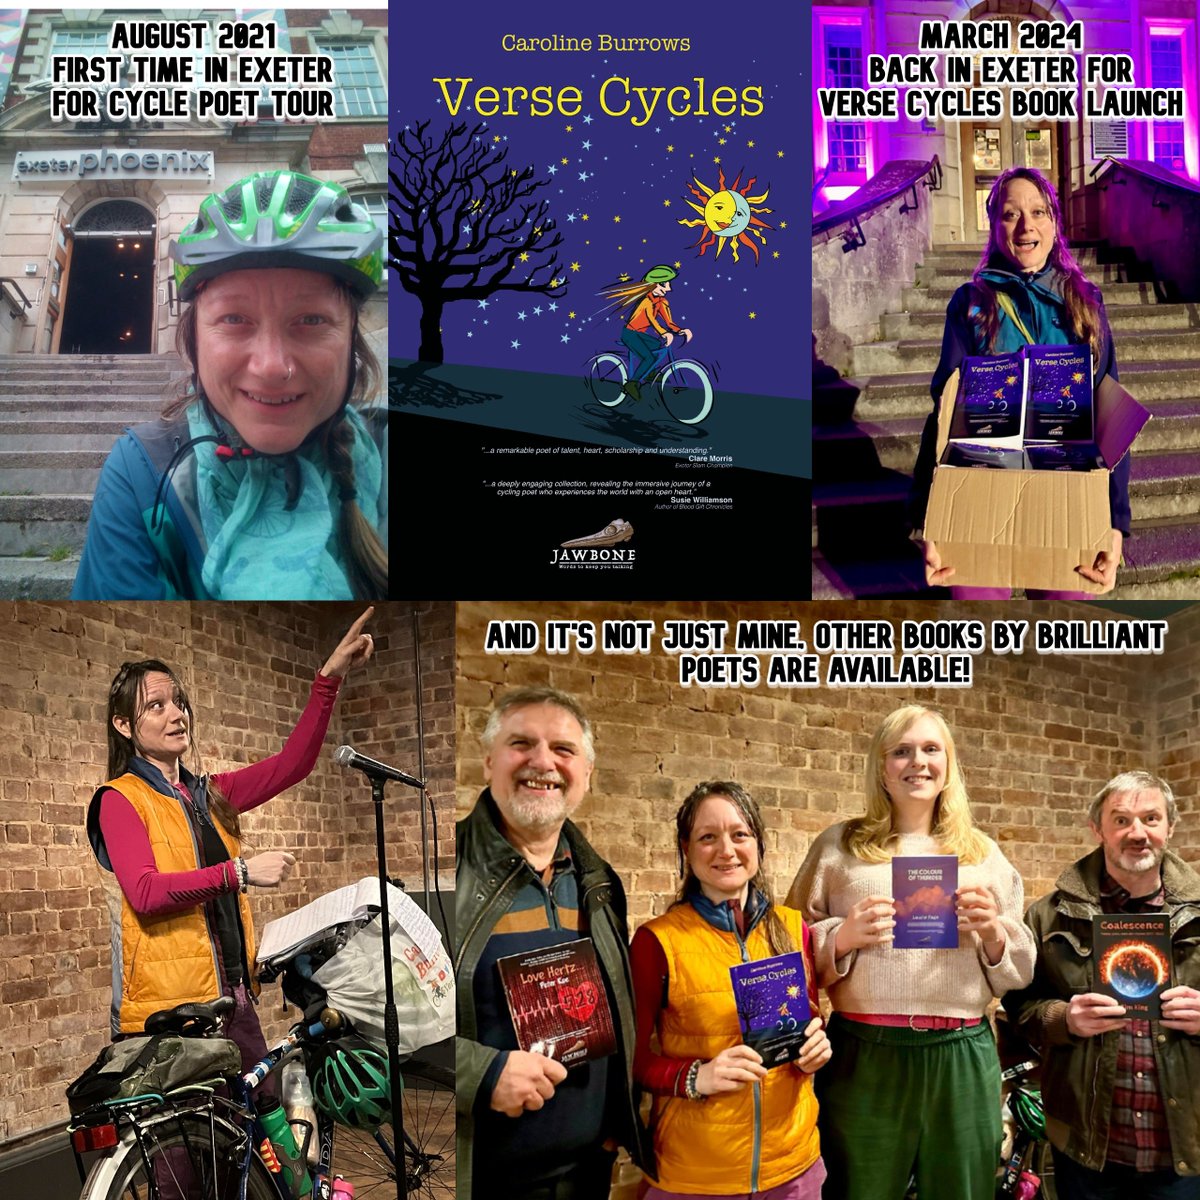 Last night my Verse Cycles poetry book launched at @exeter_phoenix.  Thank you everyone for being so kind and supportive
It's available here: wessex.media/publications/
 #worldpoetryday #cyclepoet #versecycles #carolineburrows #versecycle #takingthemic #poetrycollection #lovepoetry